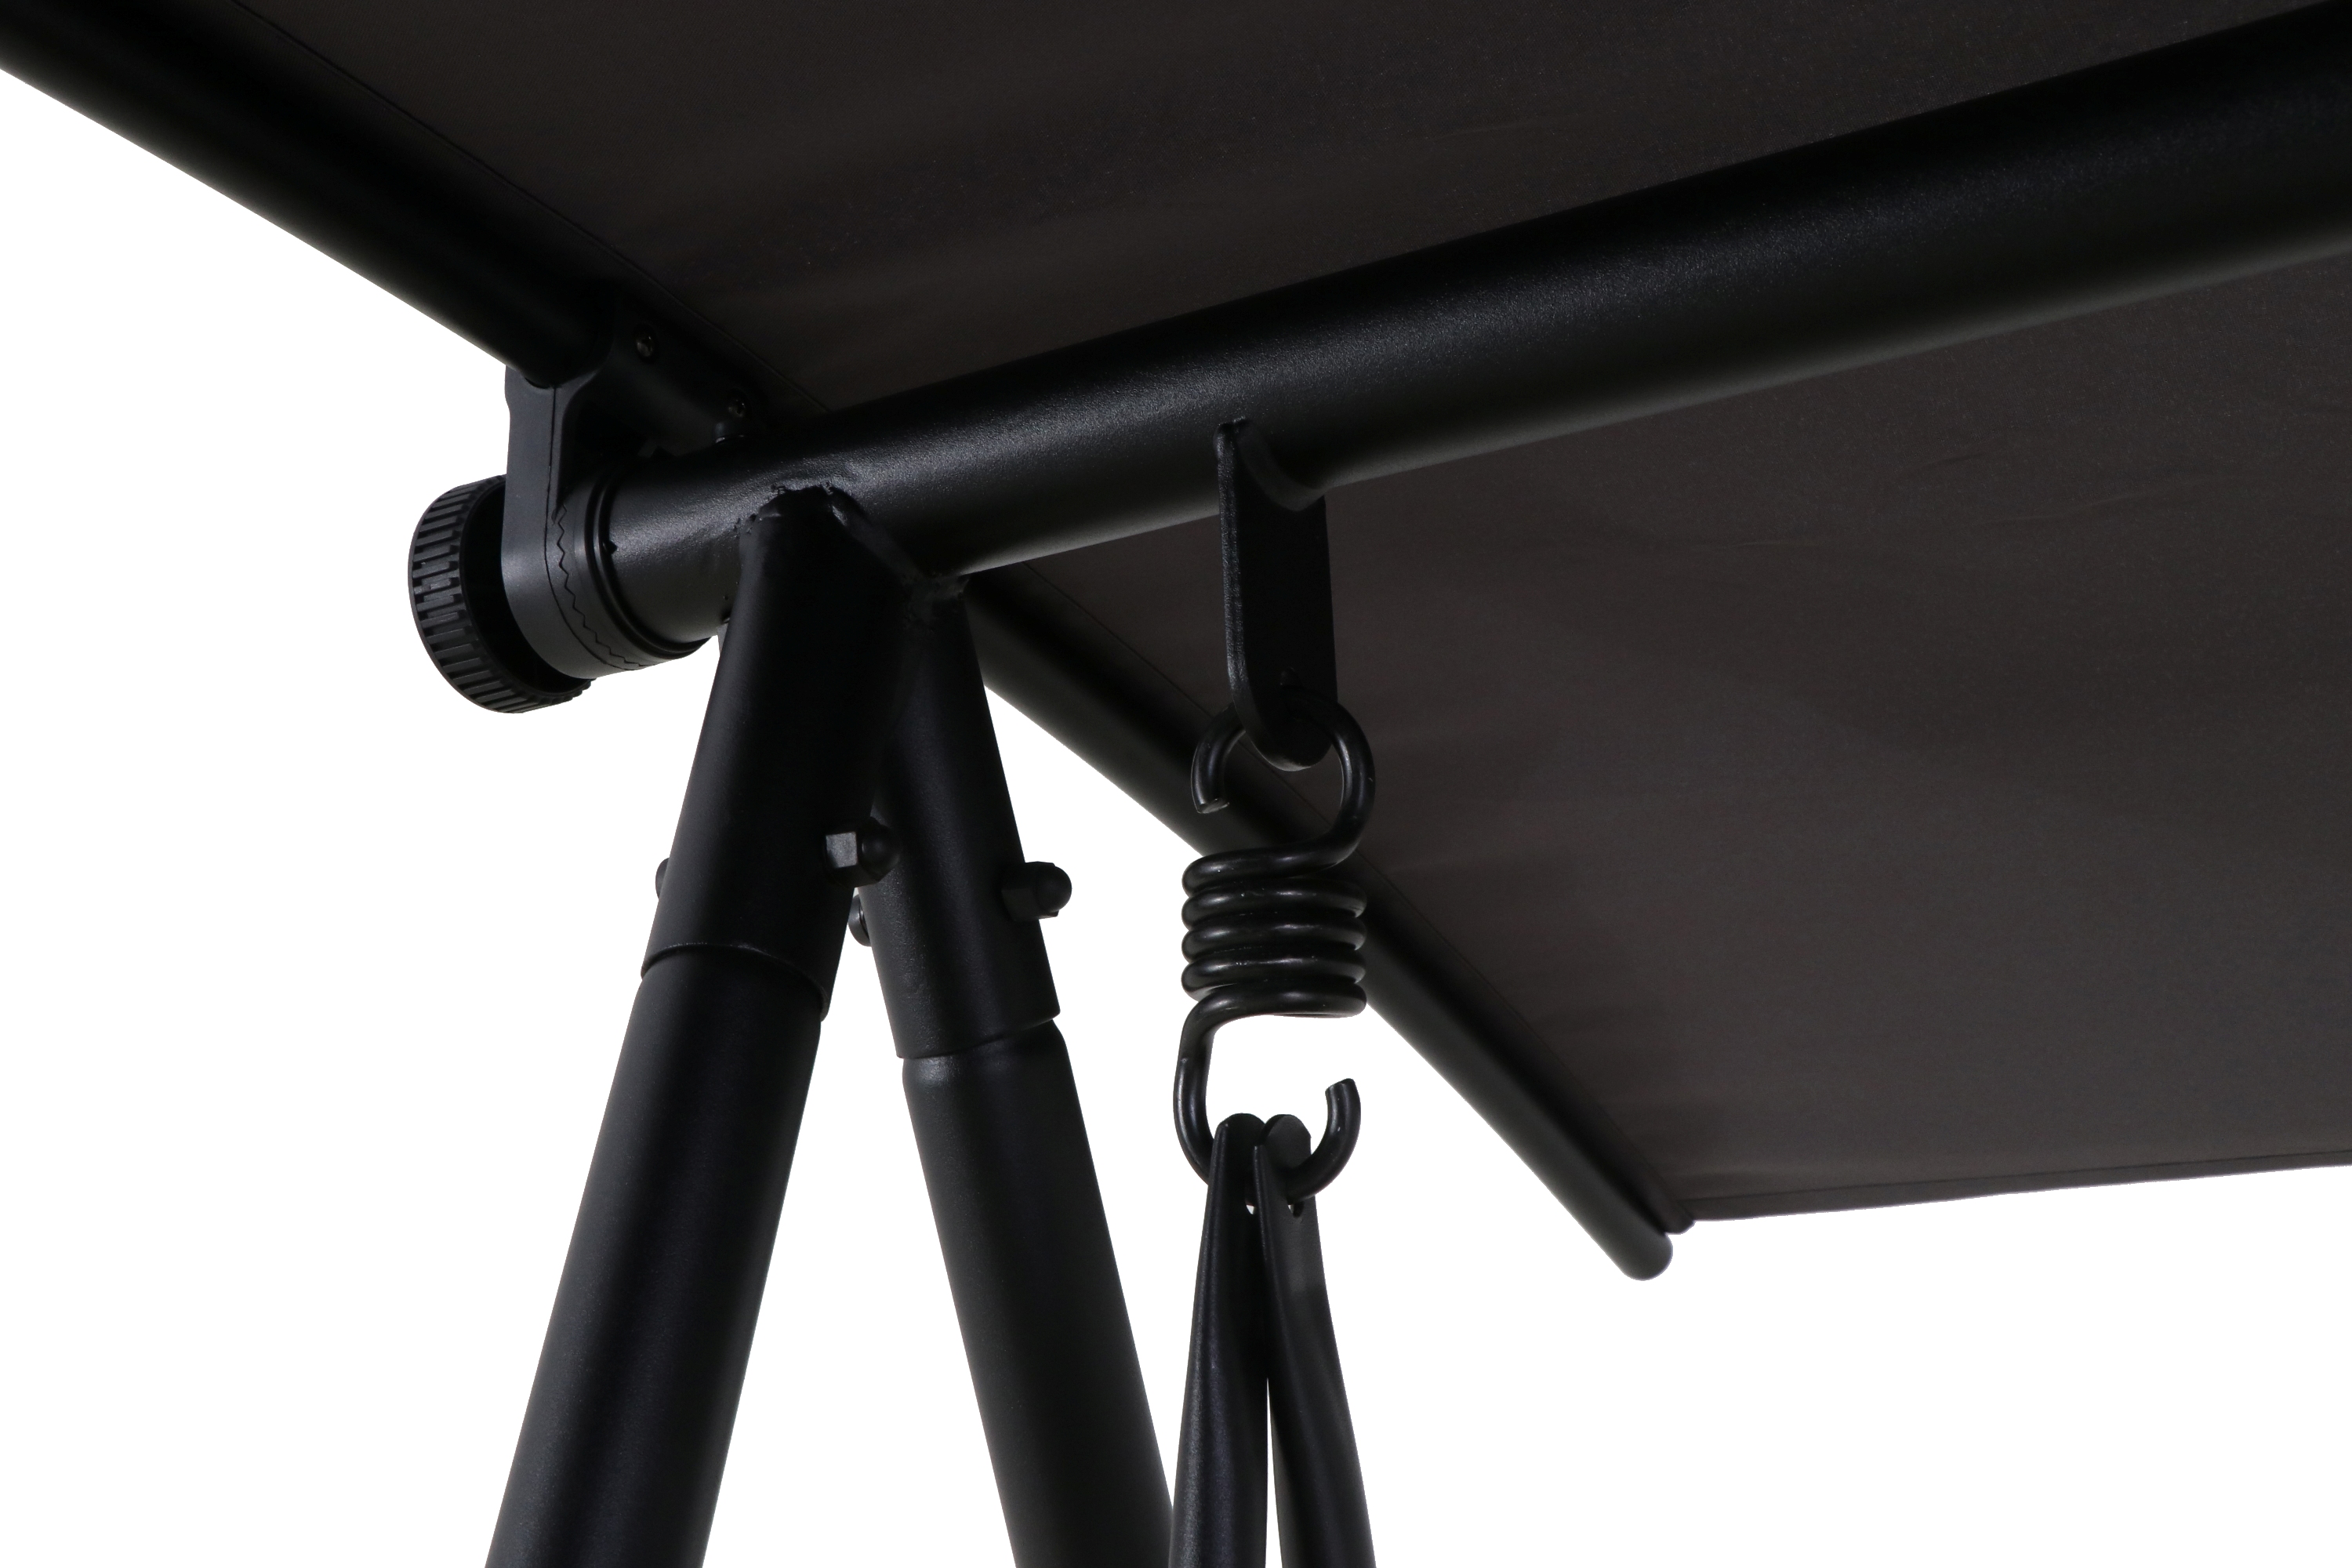 Mainstays Albany Lane 2-Seat Steel Canopy Porch Swing, Black/Gray - image 3 of 9